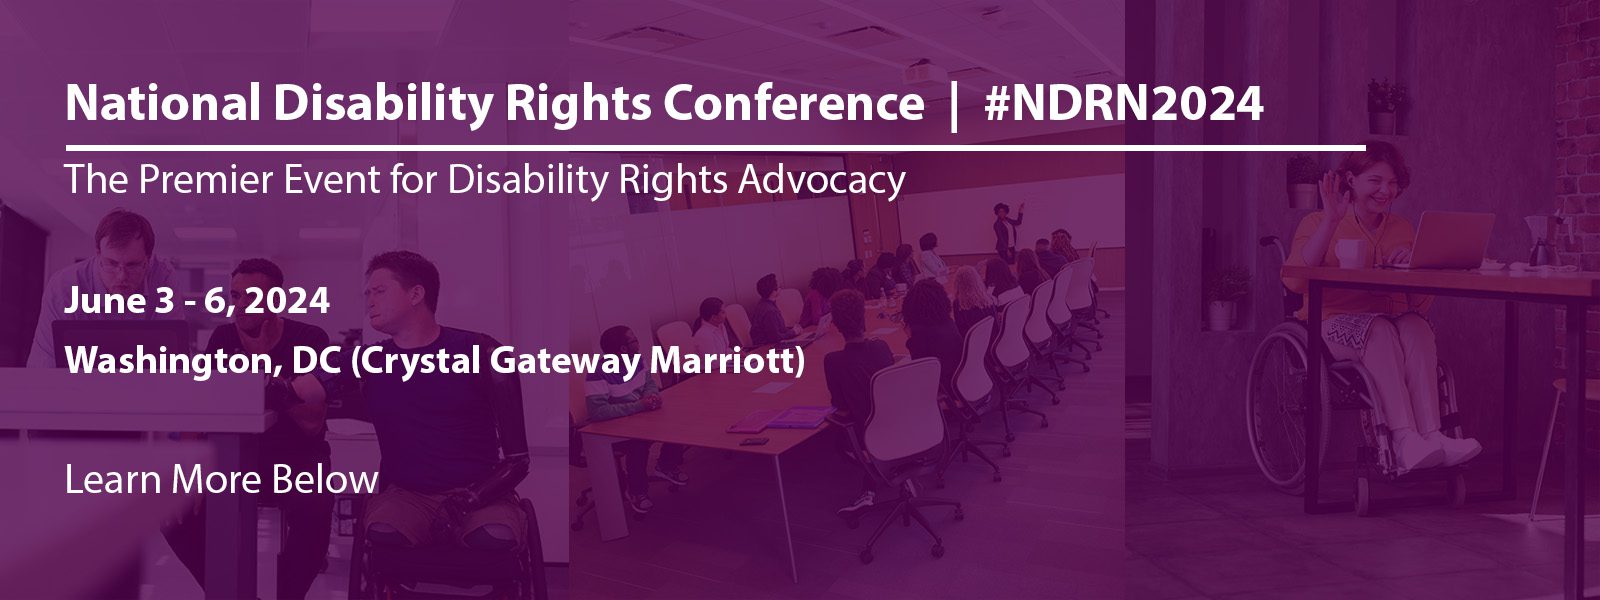 Page banner, purple transparent block with a faint photo of a conference room table with people listening to a presentation. Text reads National Disability Rights Conference | #NDRN2024 The Premier Event for Disability Rights Advocacy June 3 - 6, 2024 Washington, DC (Crystal Gateway Marriott) Learn More Below